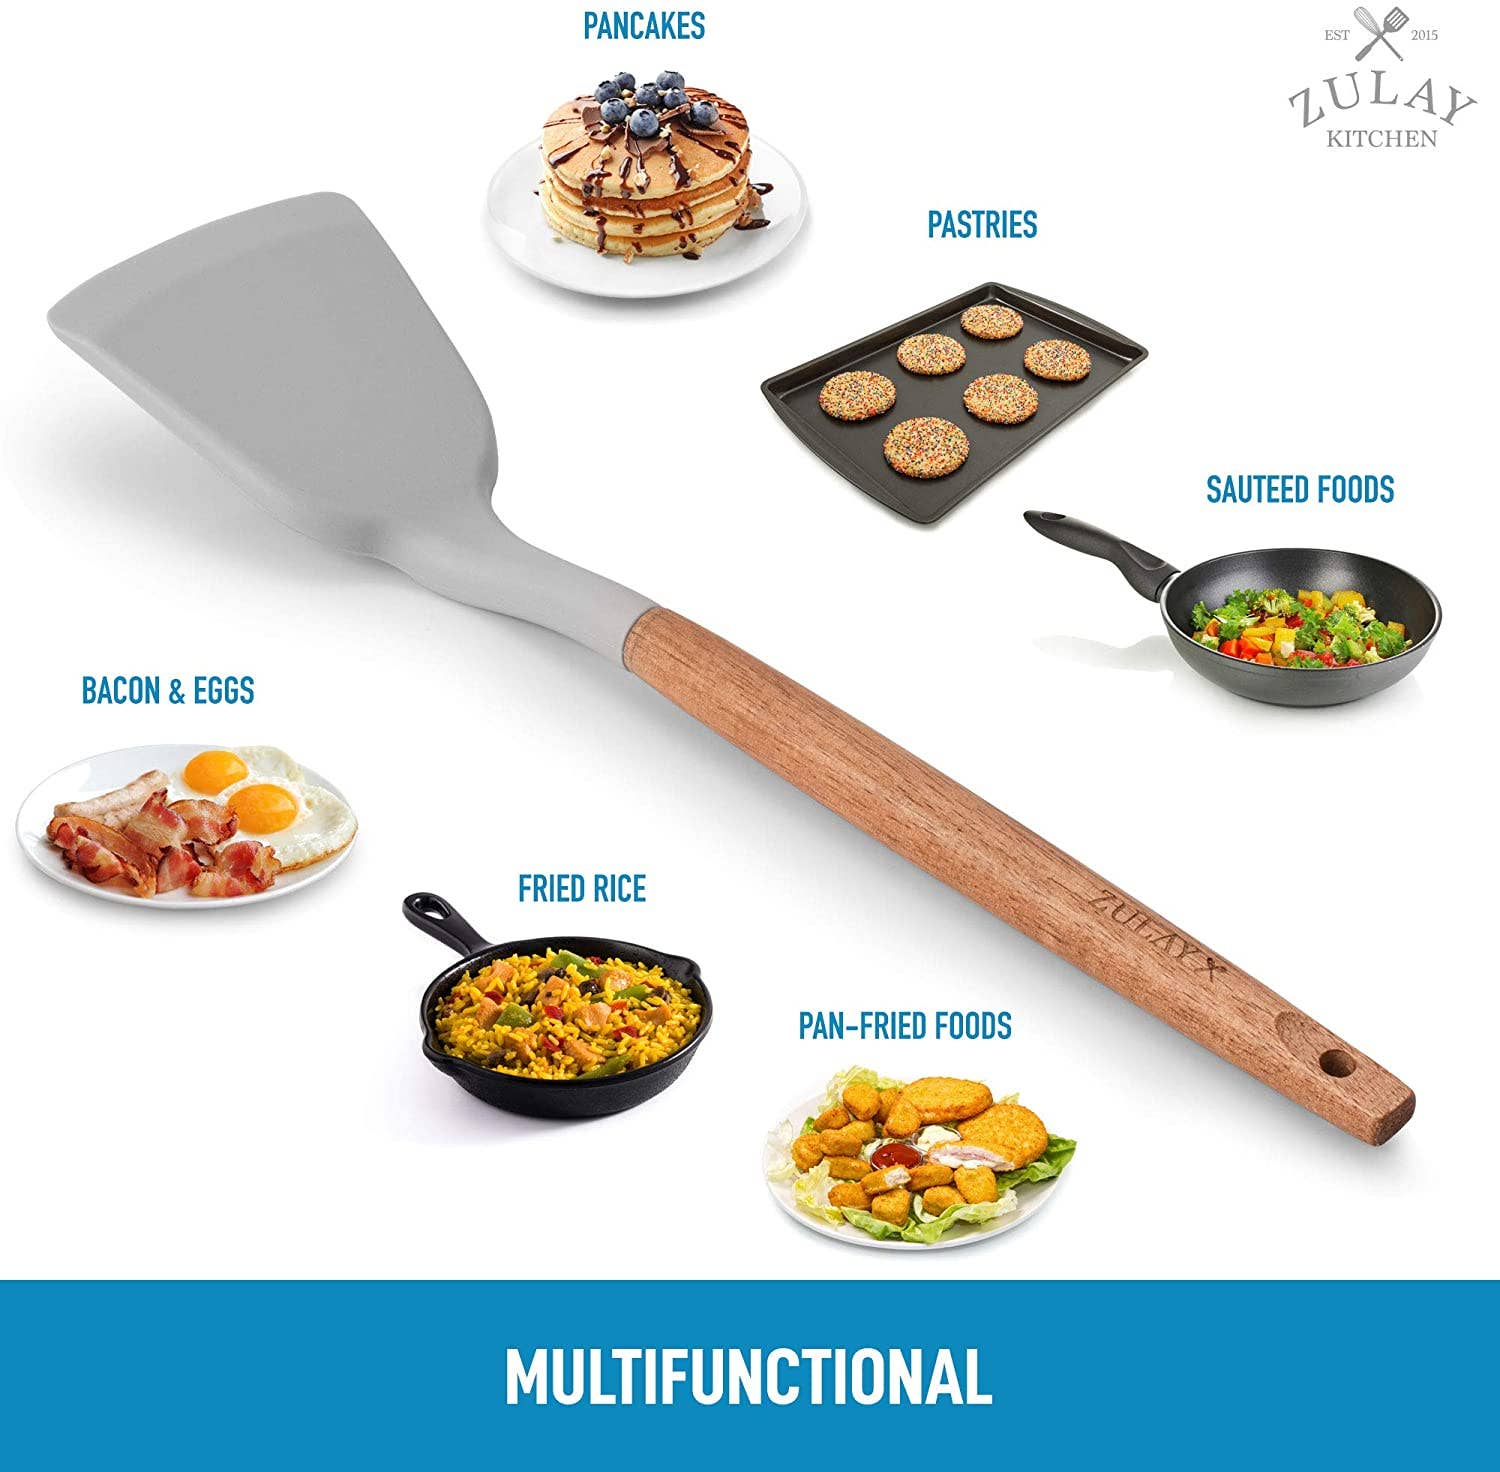 The spatula is perfect for anything you cook in a skillet.